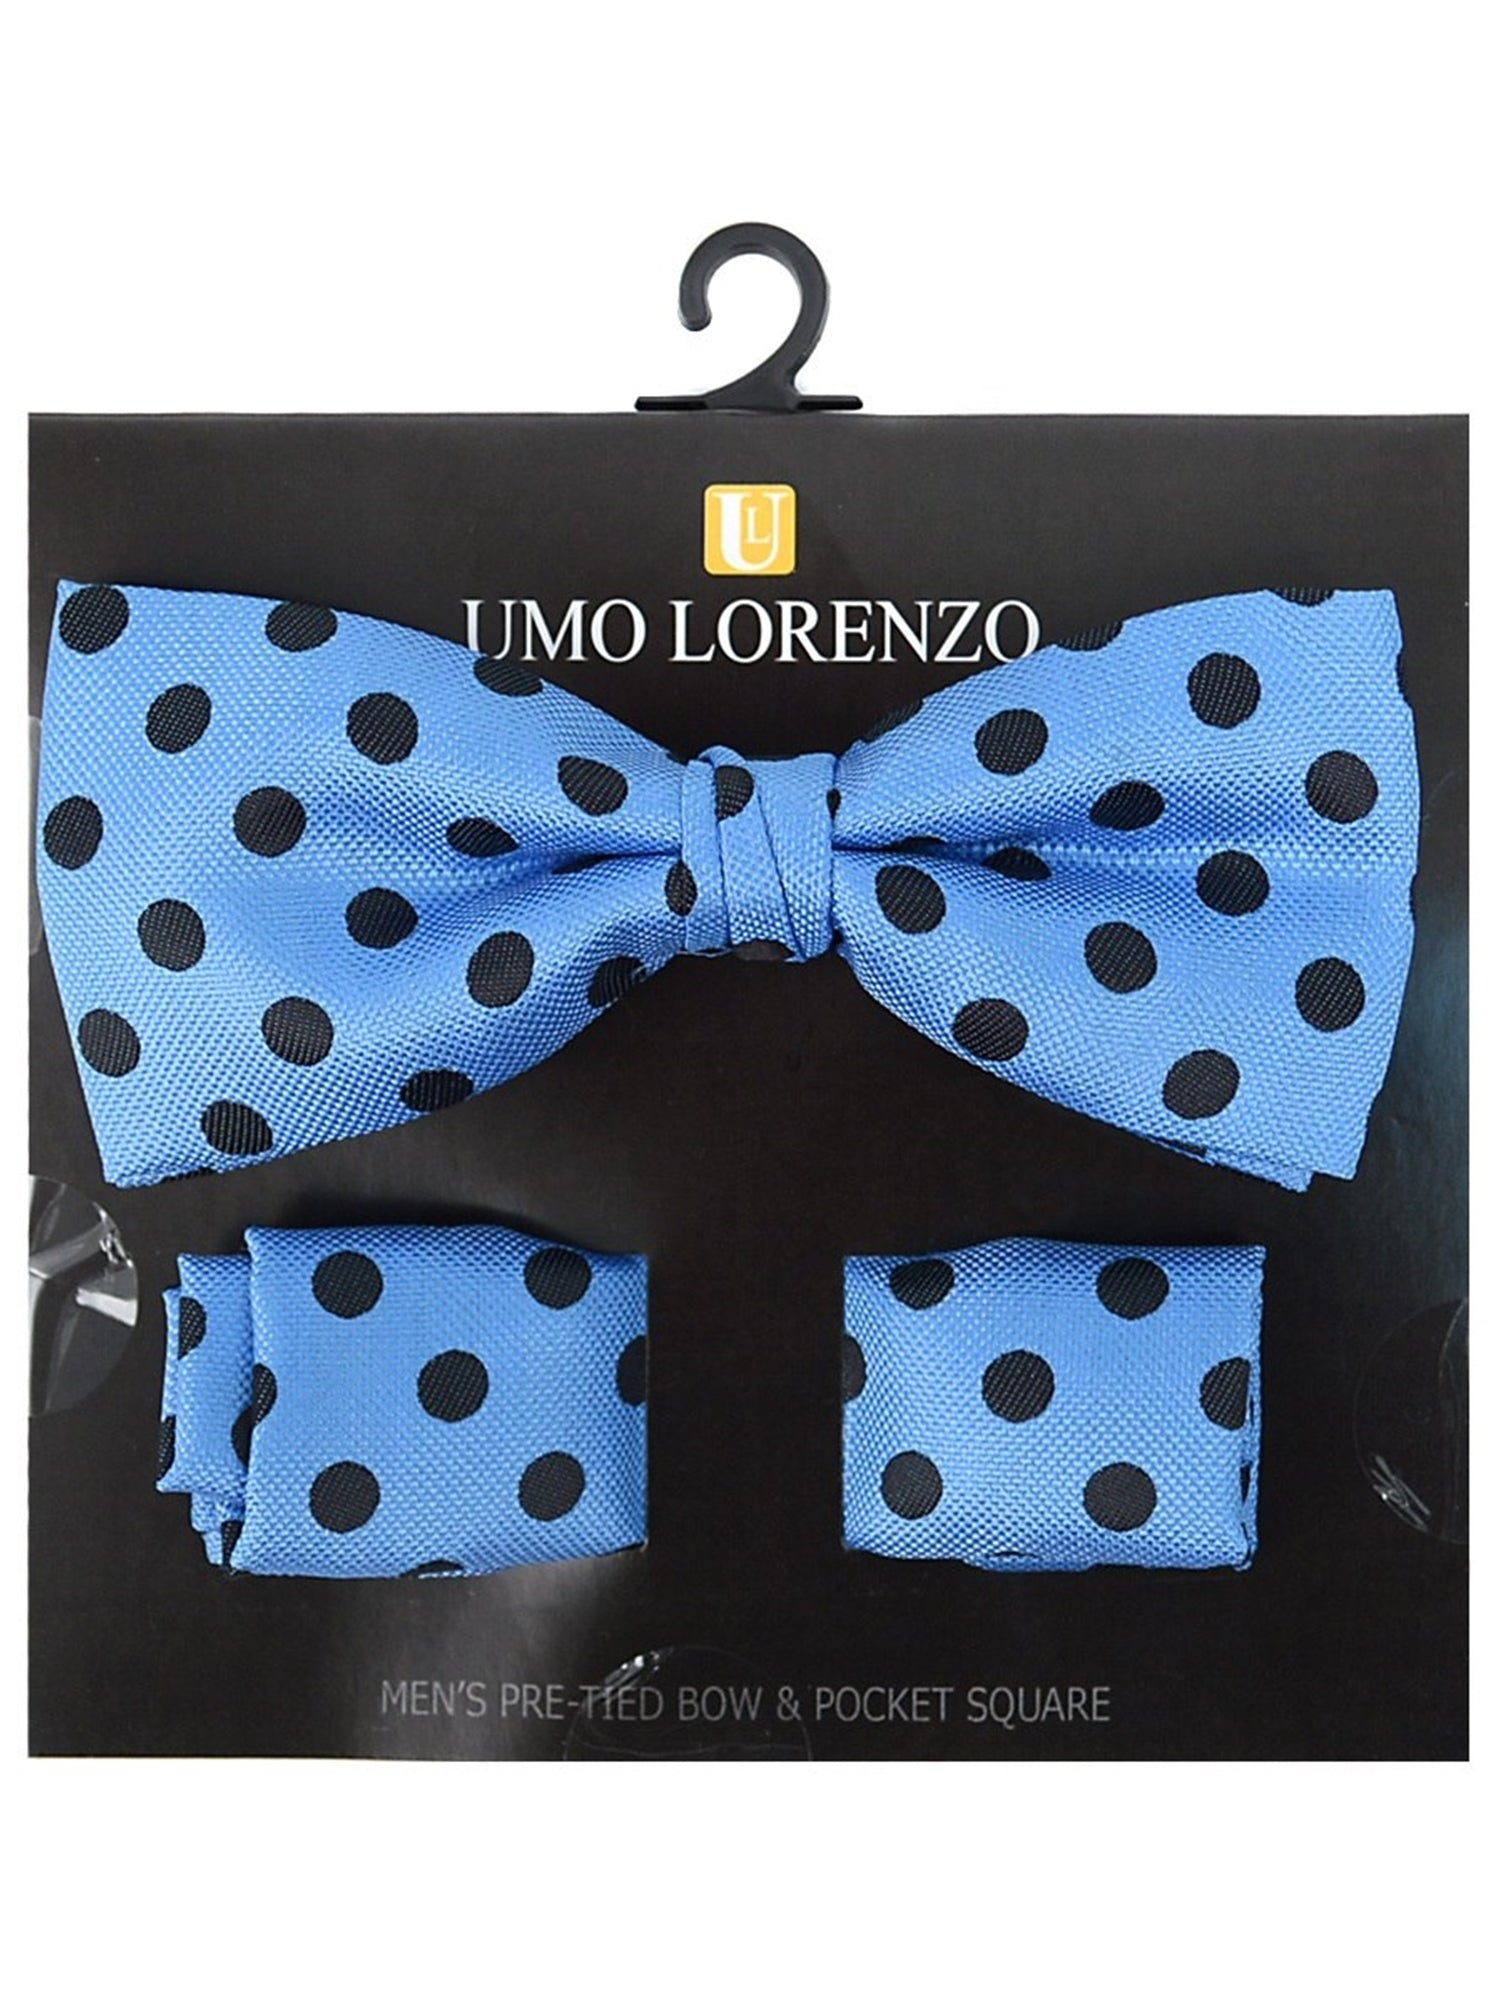 Men's Black And Gold Polka Dots Pre-tied Adjustable Length Bow Tie & Hanky Set Men's Solid Color Bow Tie TheDapperTie Turquoise & Black One Size 